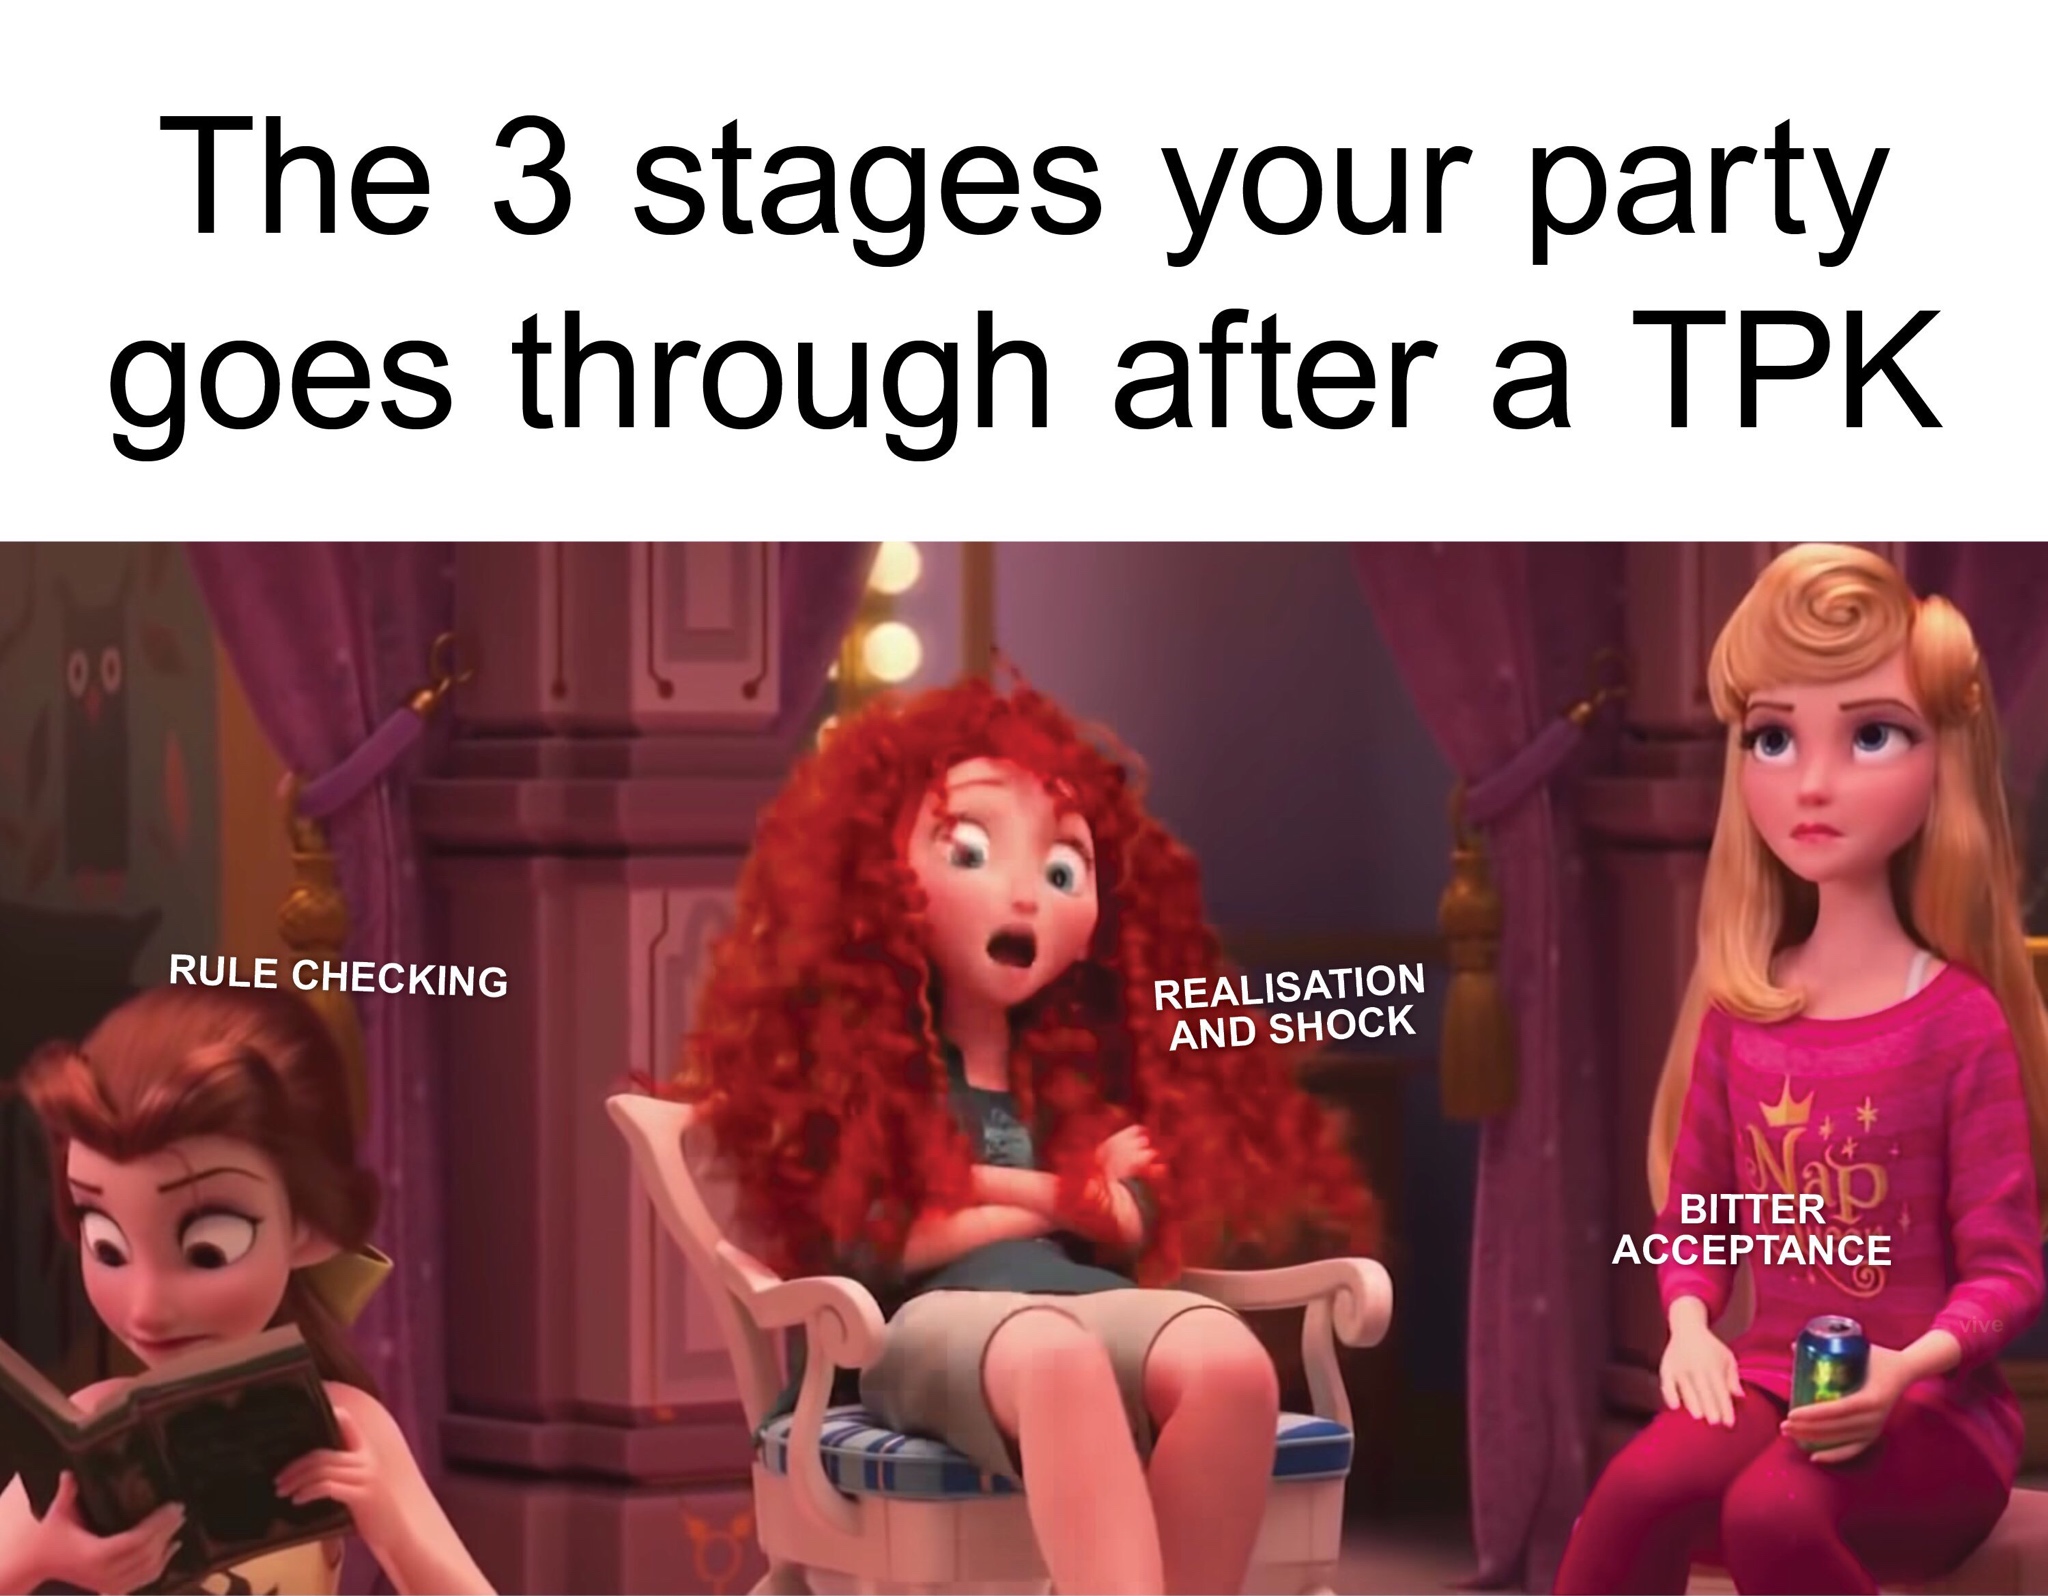 barbie - The 3 stages your party goes through after a Tpk Rule Checking Realisation And Shock Bitter Acceptance